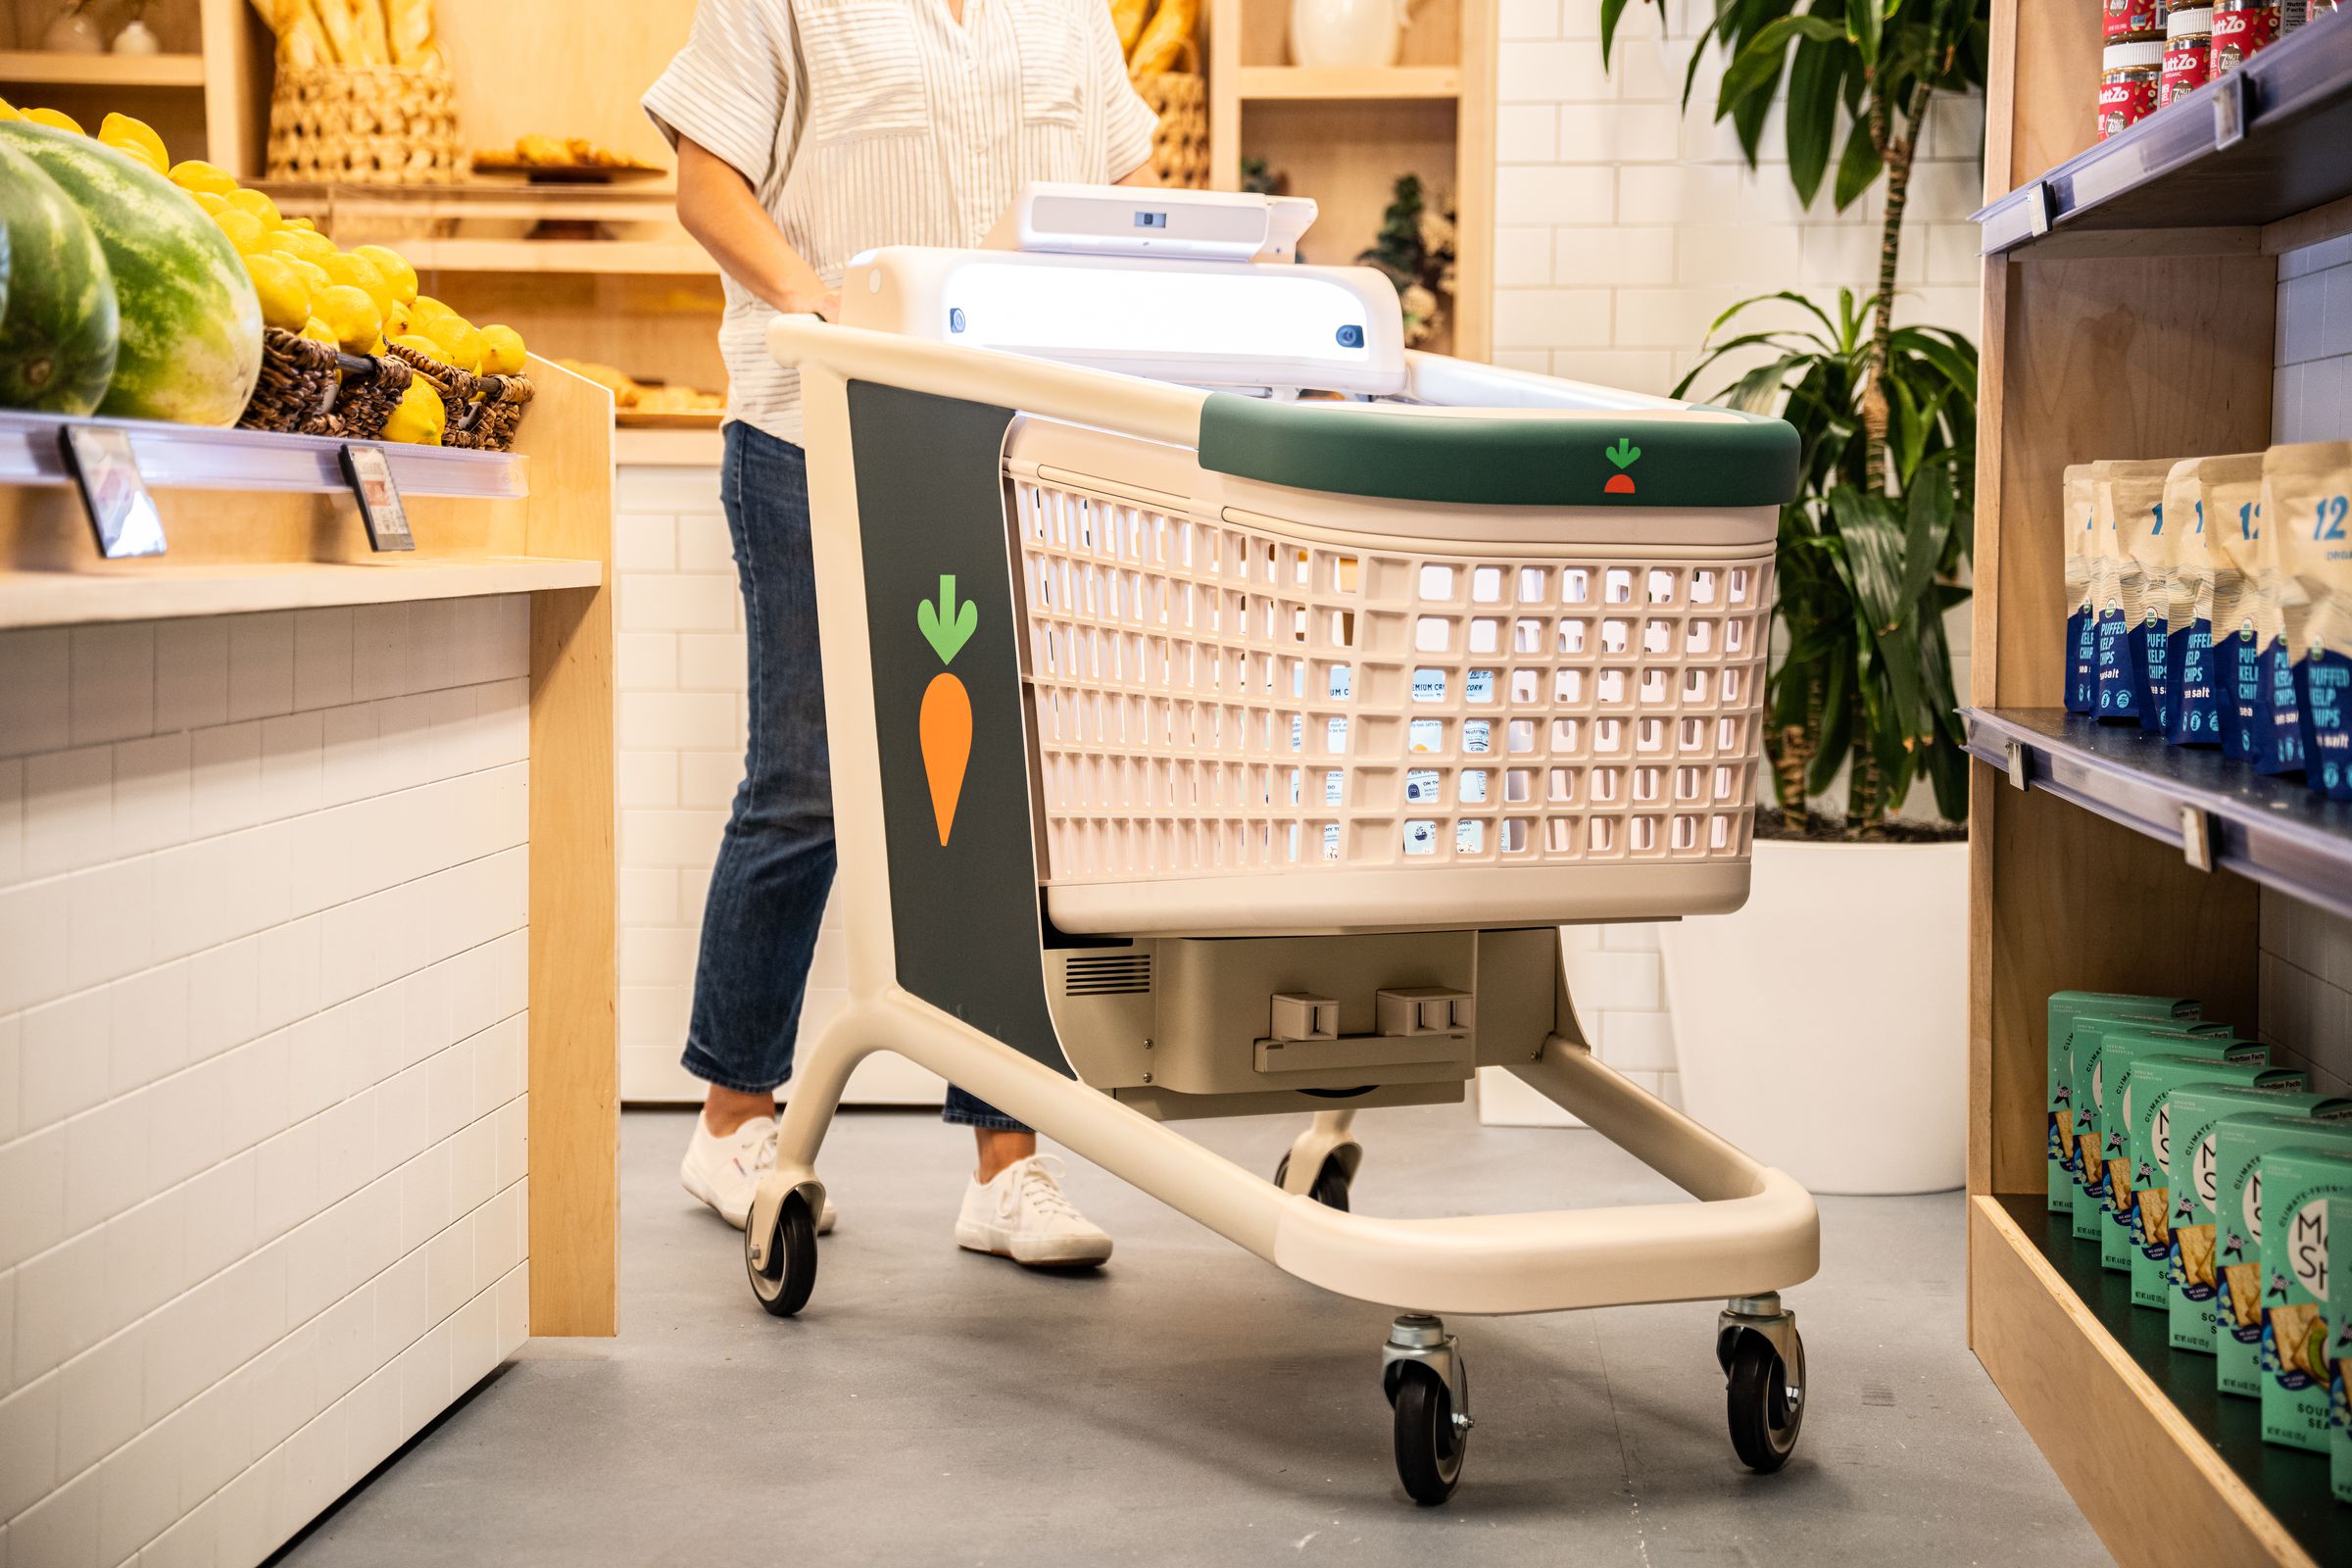 Multiple sensors and cameras detect products as you slowly lower them into the cart.